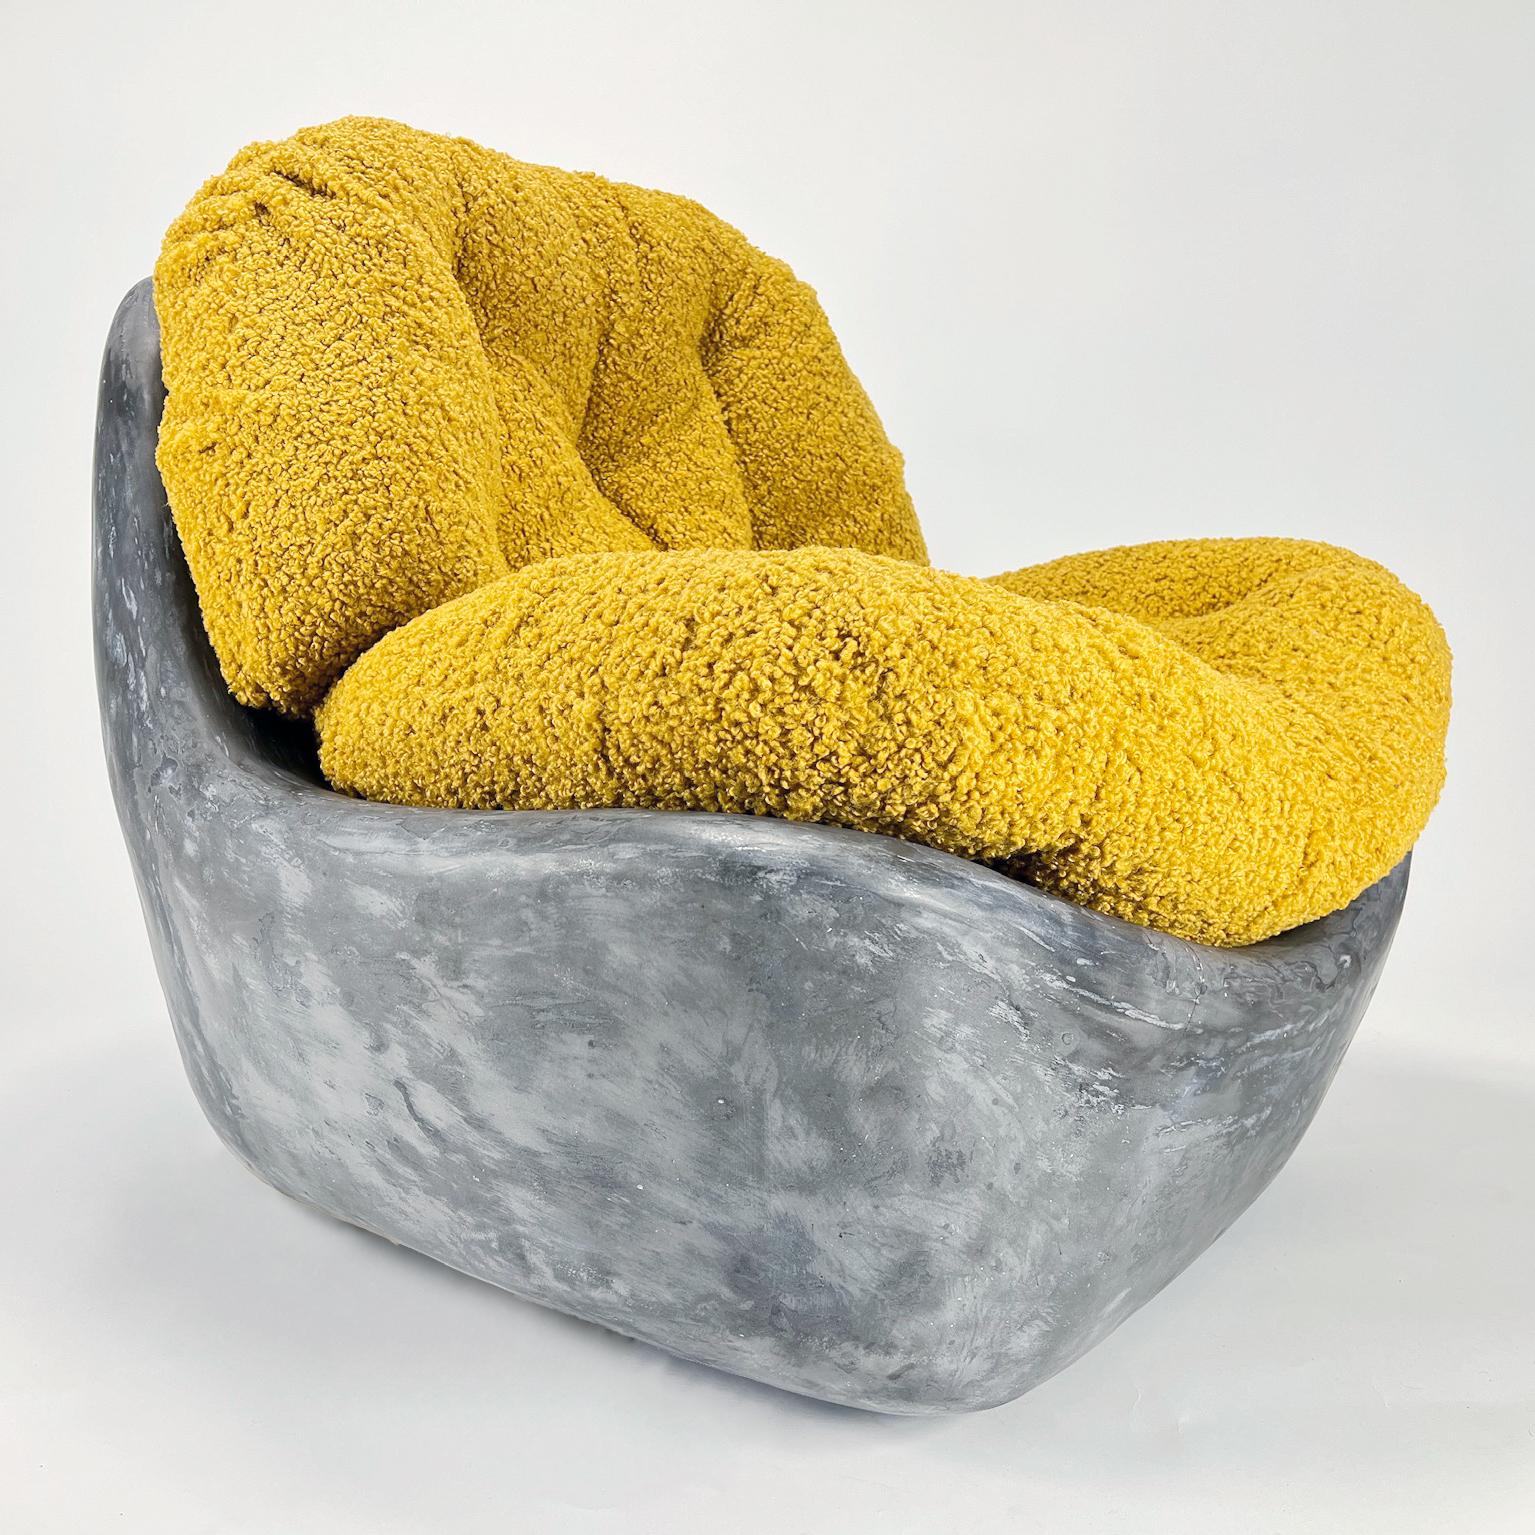 Wolfie Chair by Dean and Dahl

L 37